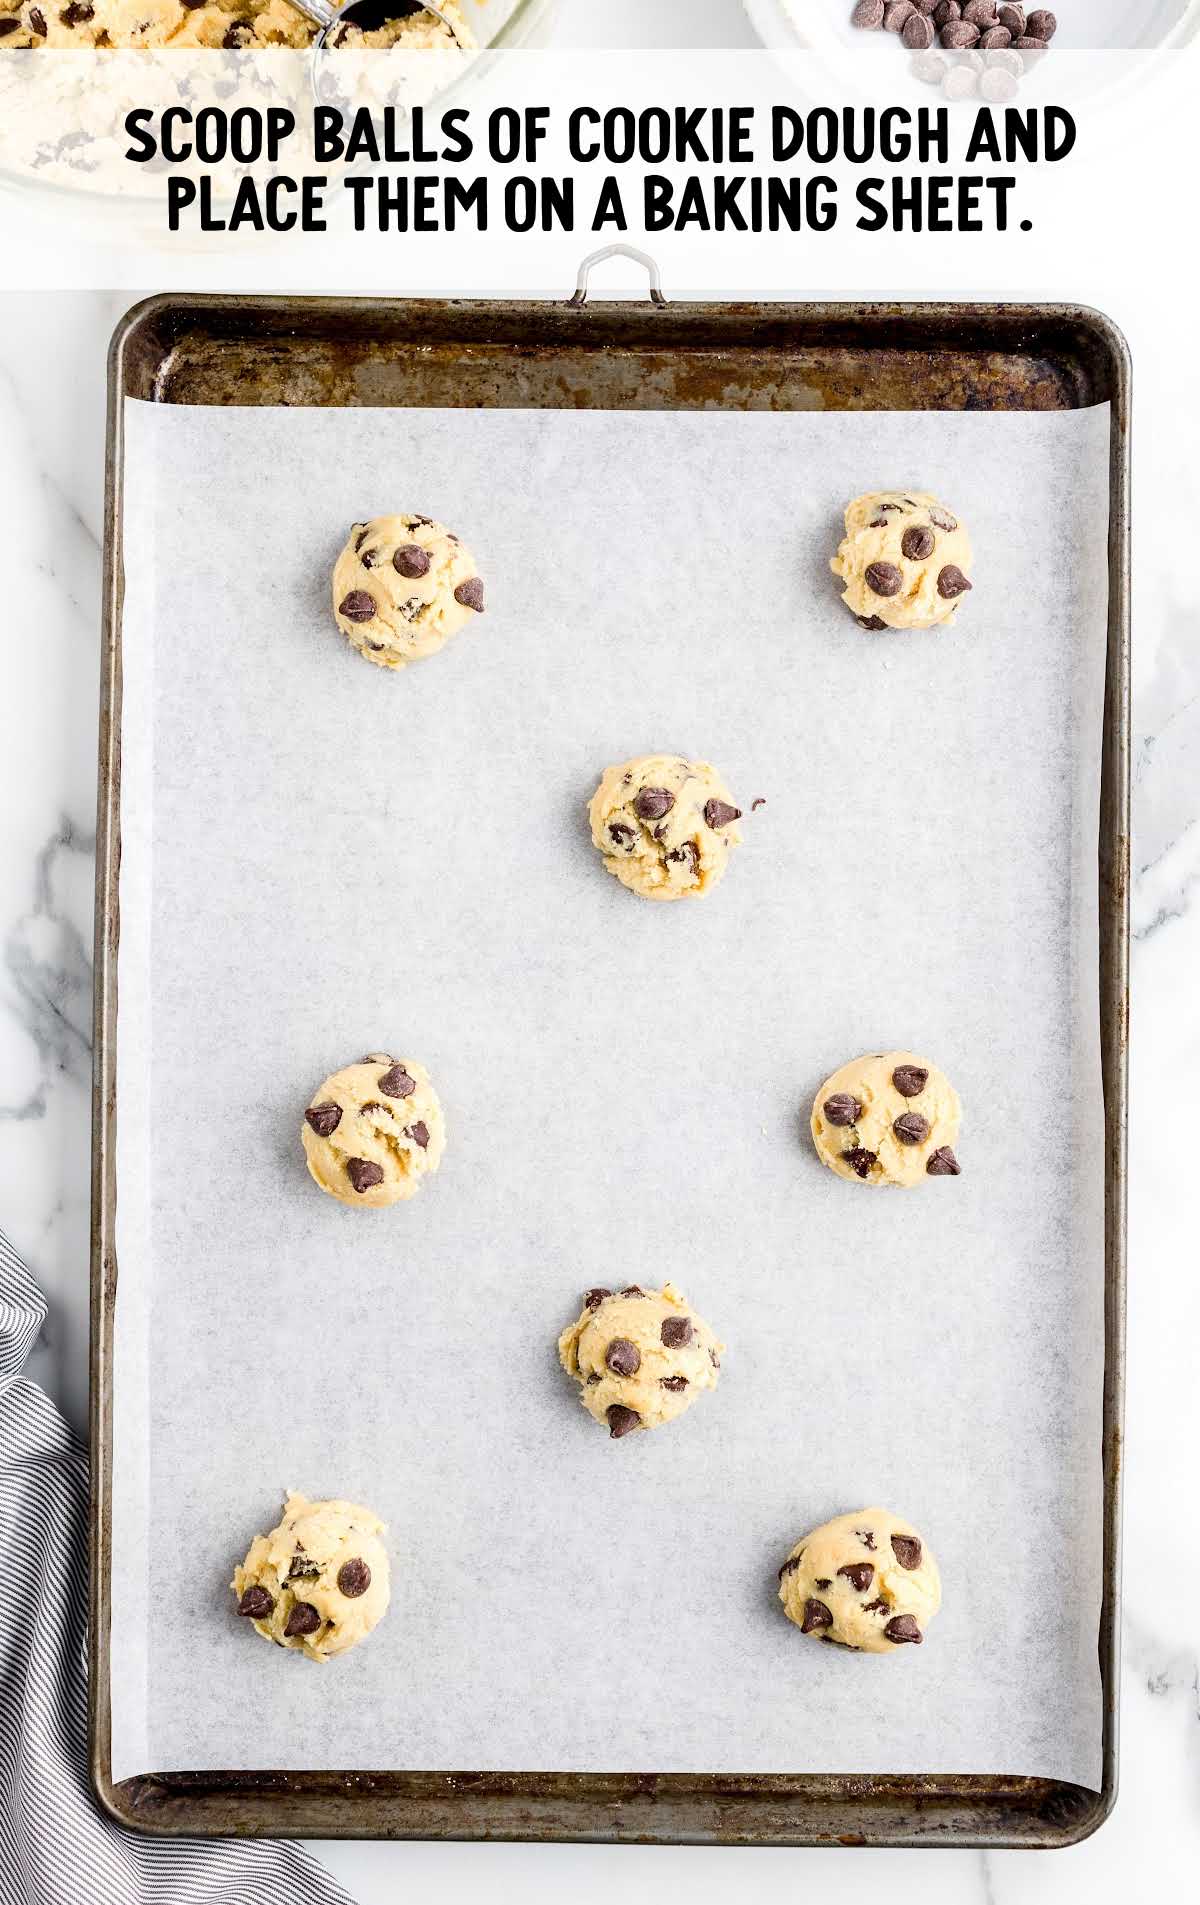 Chocolate Chip Pudding Cookies process shot of balls of cookie dough placed on a baking sheet